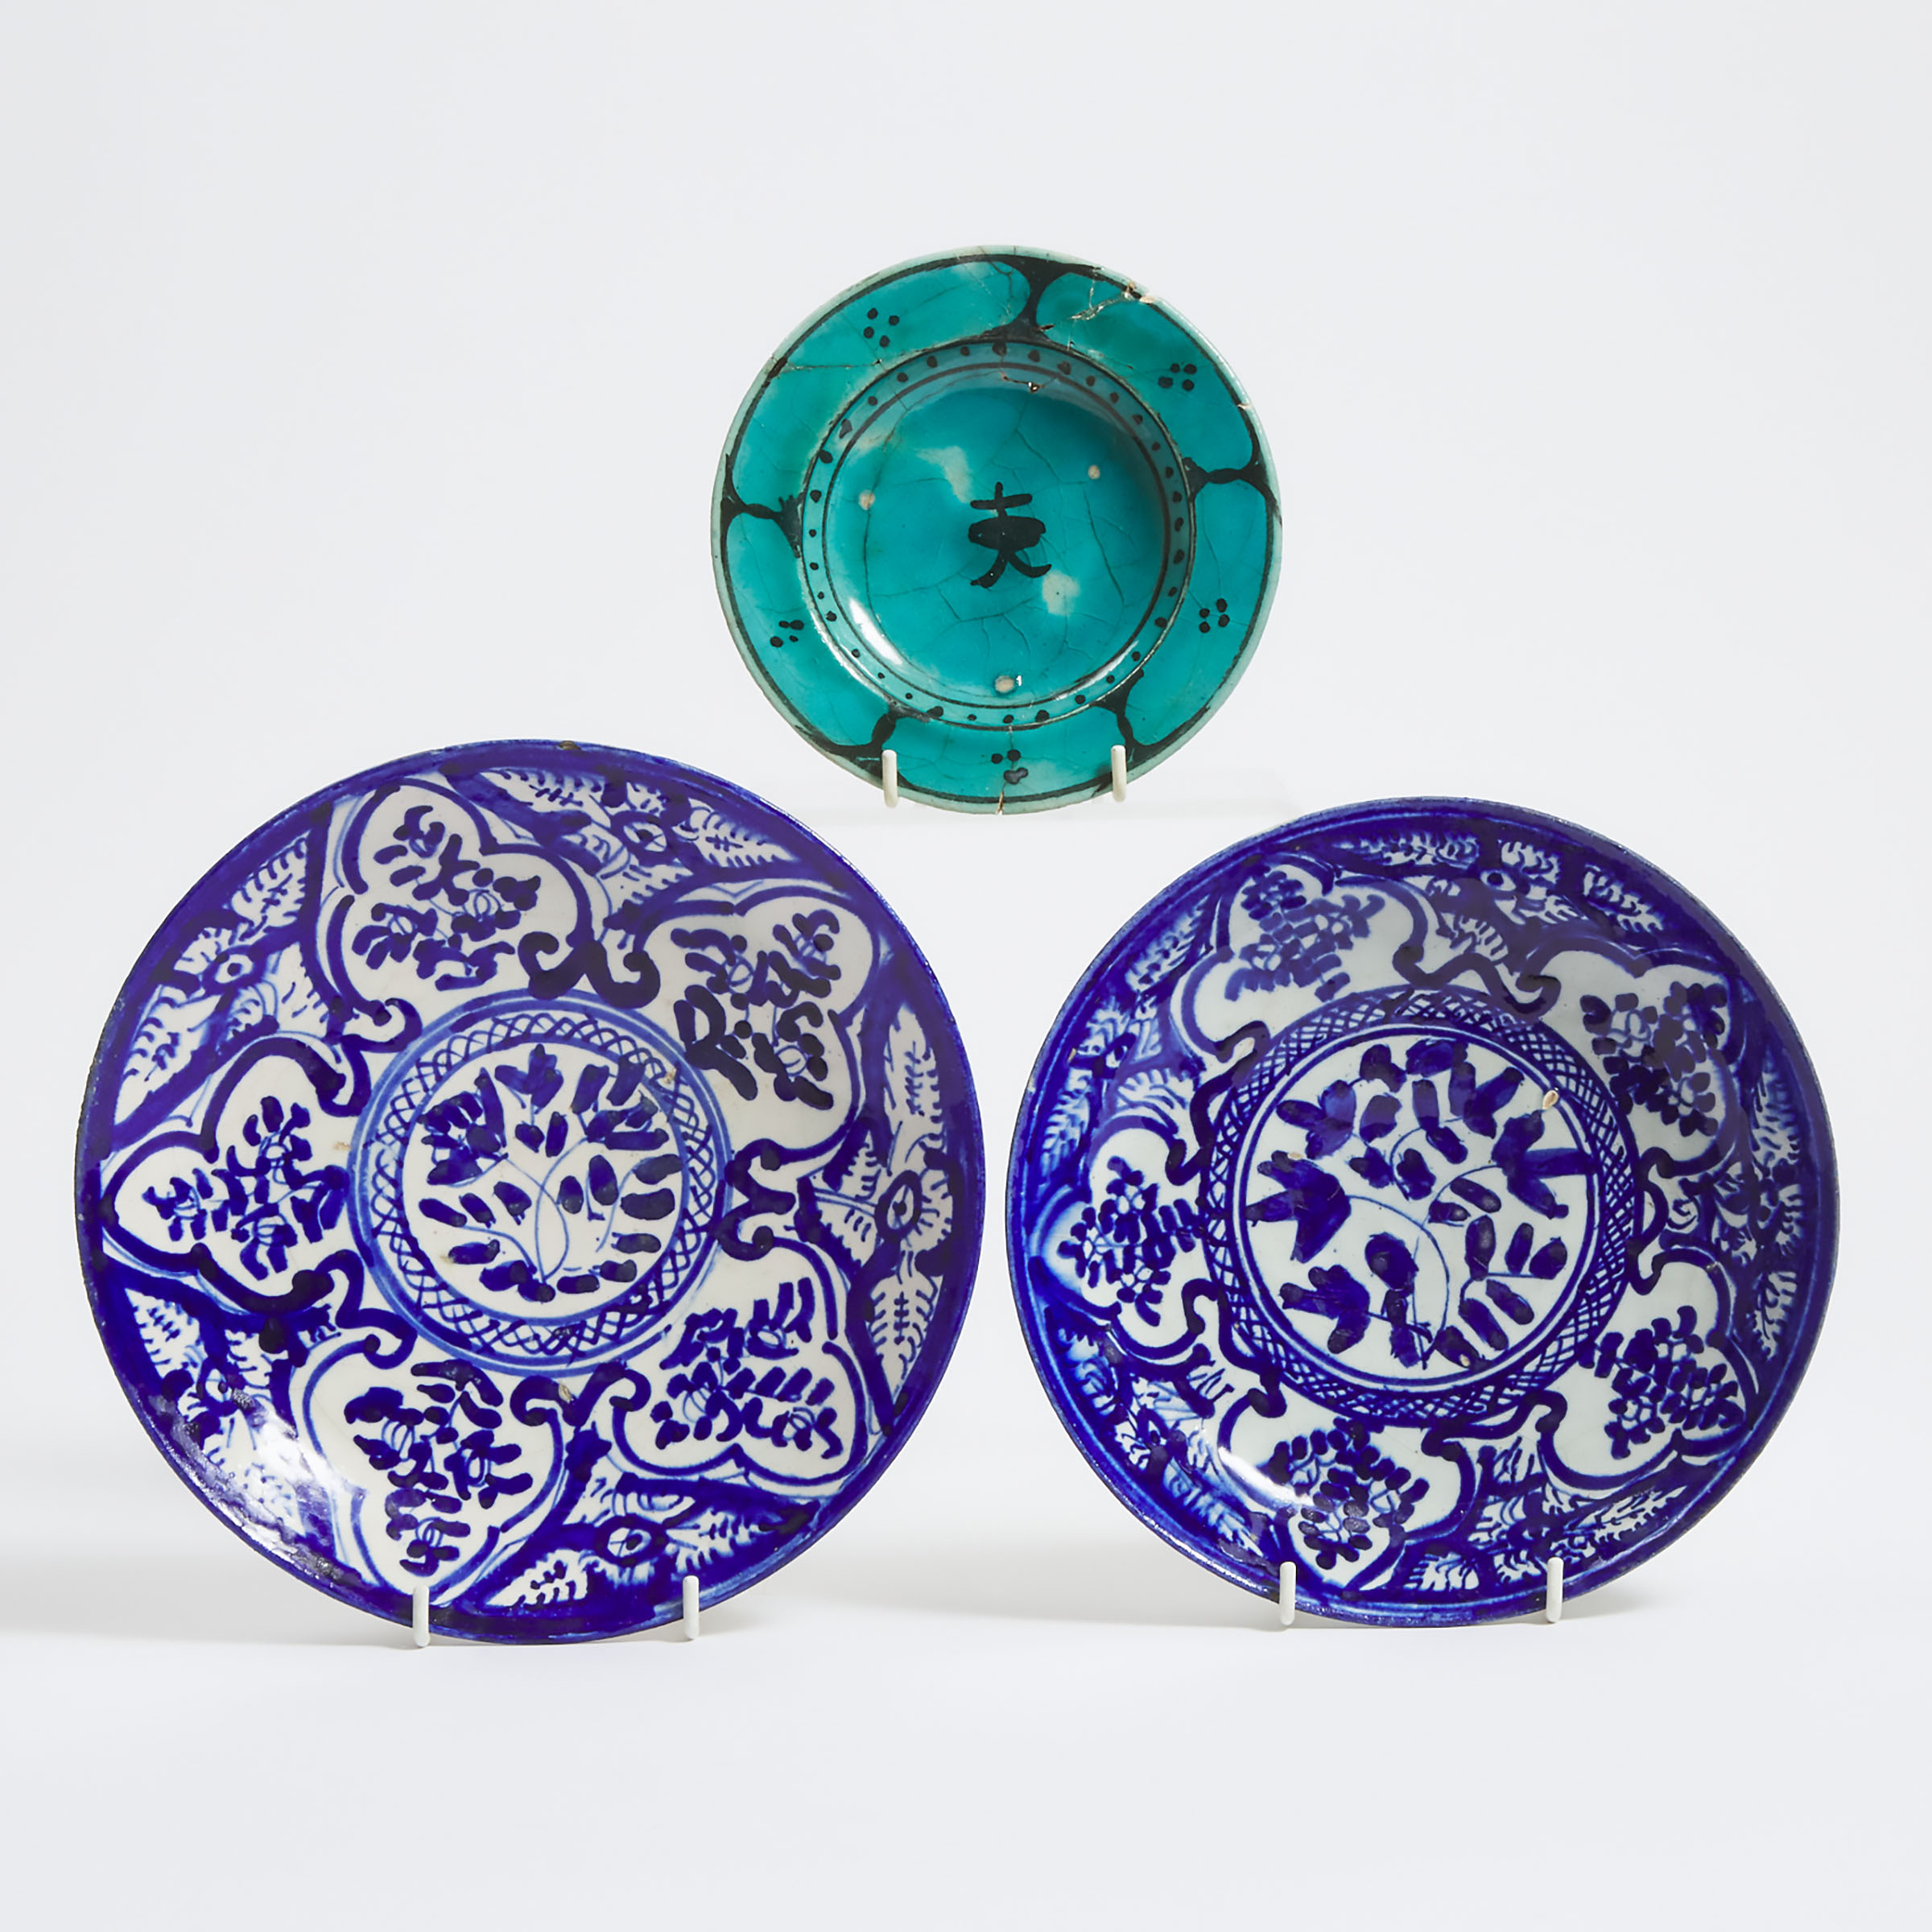 A Syrian Turquoise Glazed Shallow Bowl, 17th Century, Together with Two Persian Blue and White Plates, 19th Century